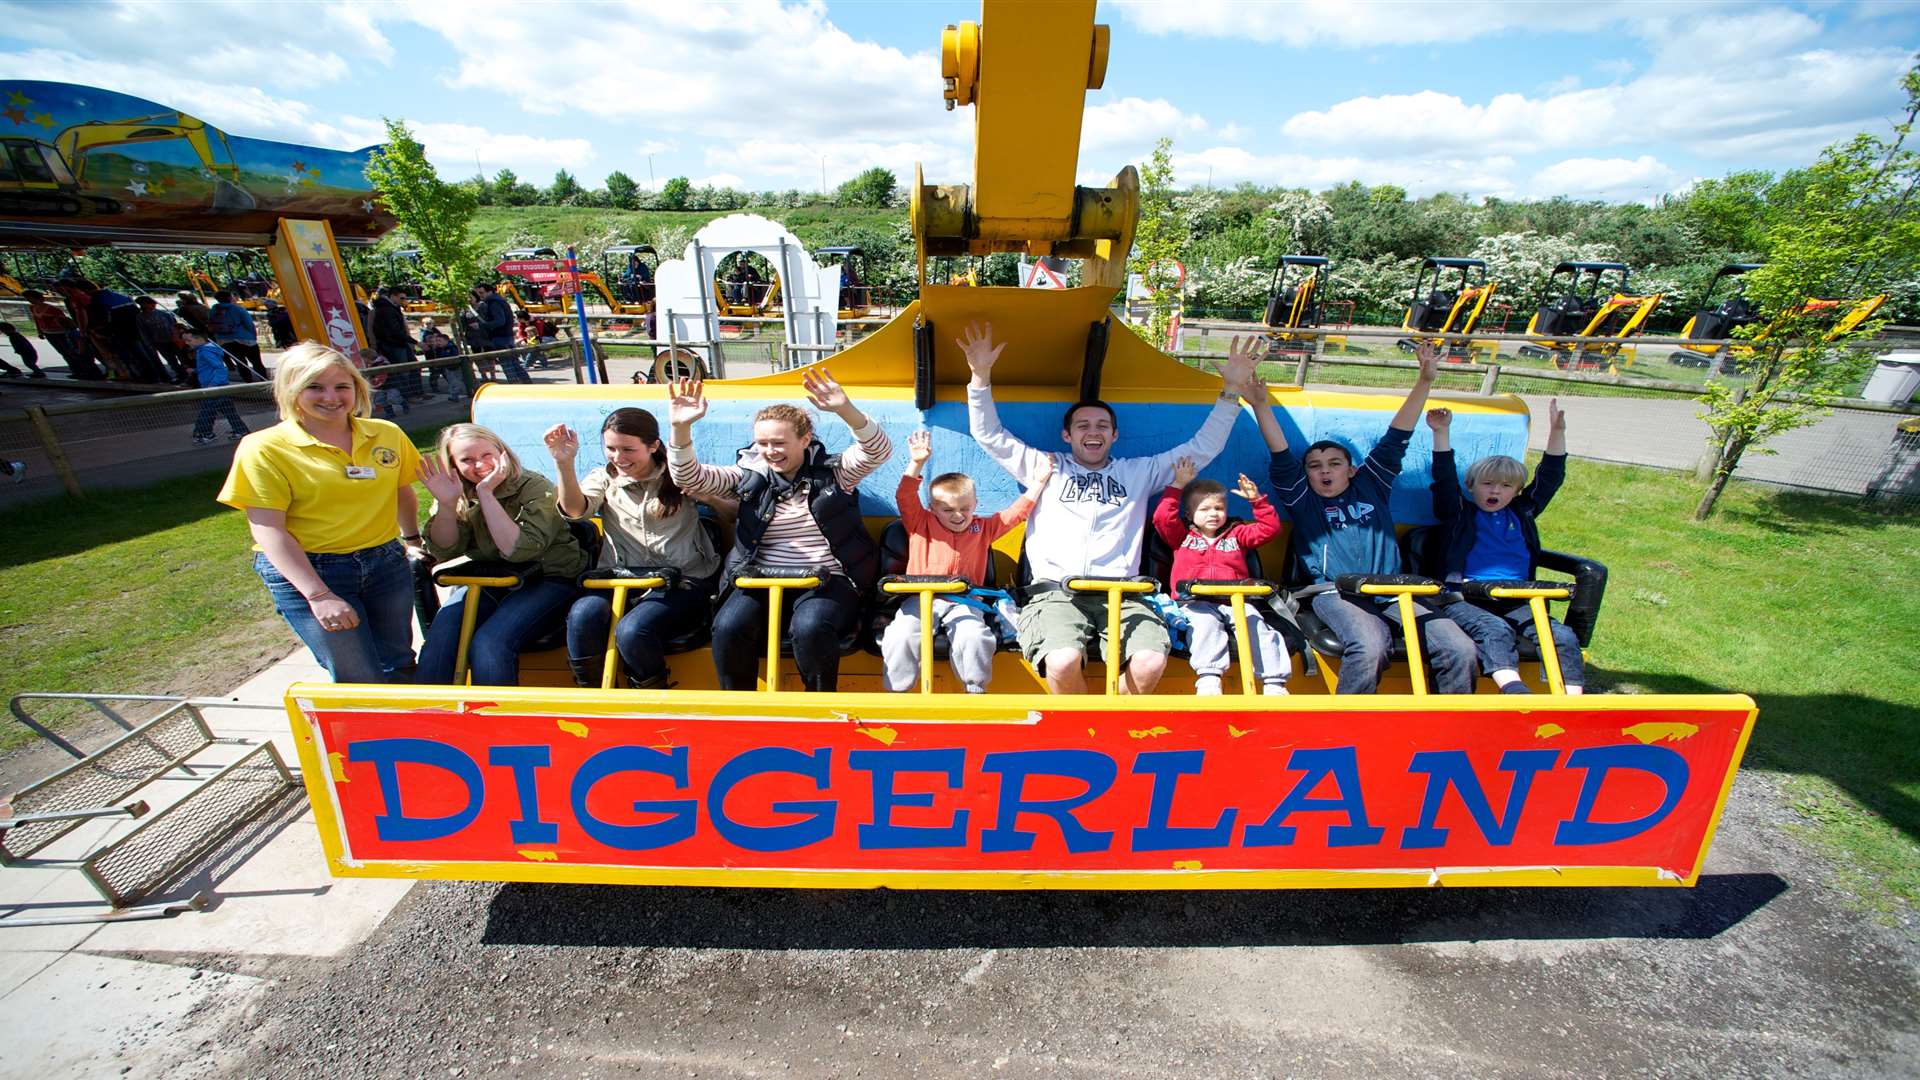 Fun for the whole family at Diggerland